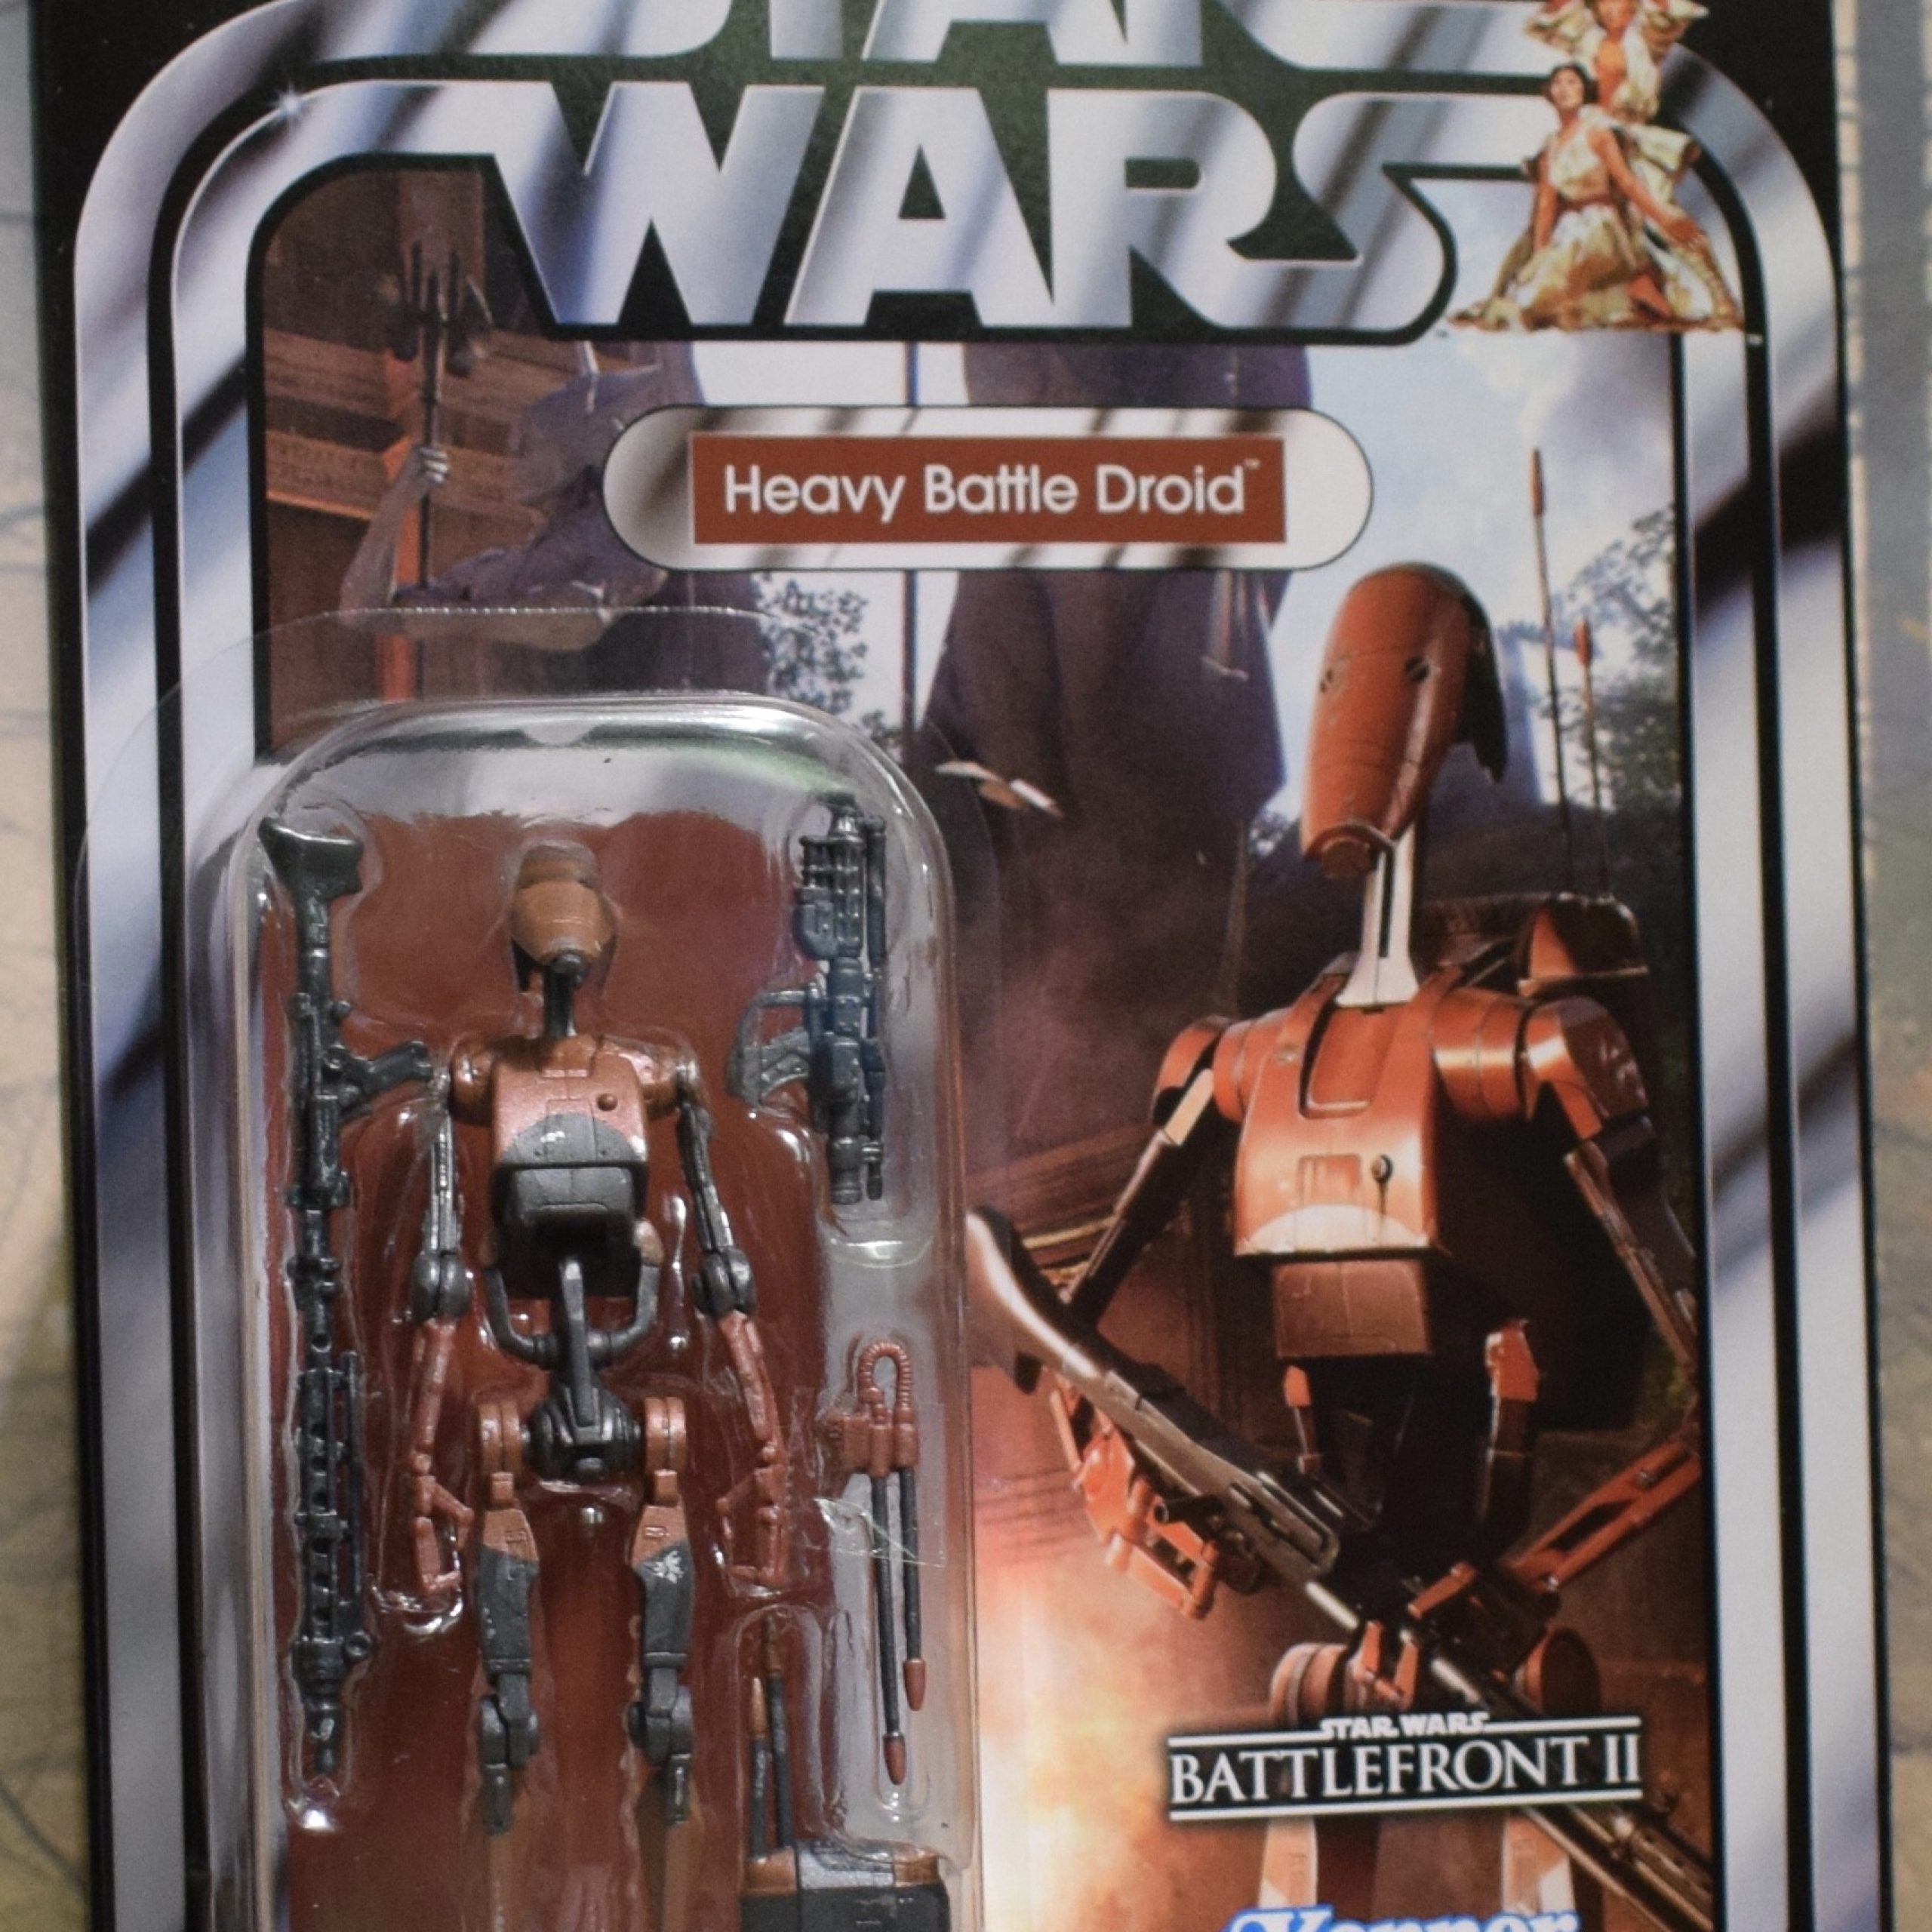 STAR WARS THE VINTAGE COLLECTION STAR WARS HEAVY BATTLE DROID BATTLEFRONT II VC193